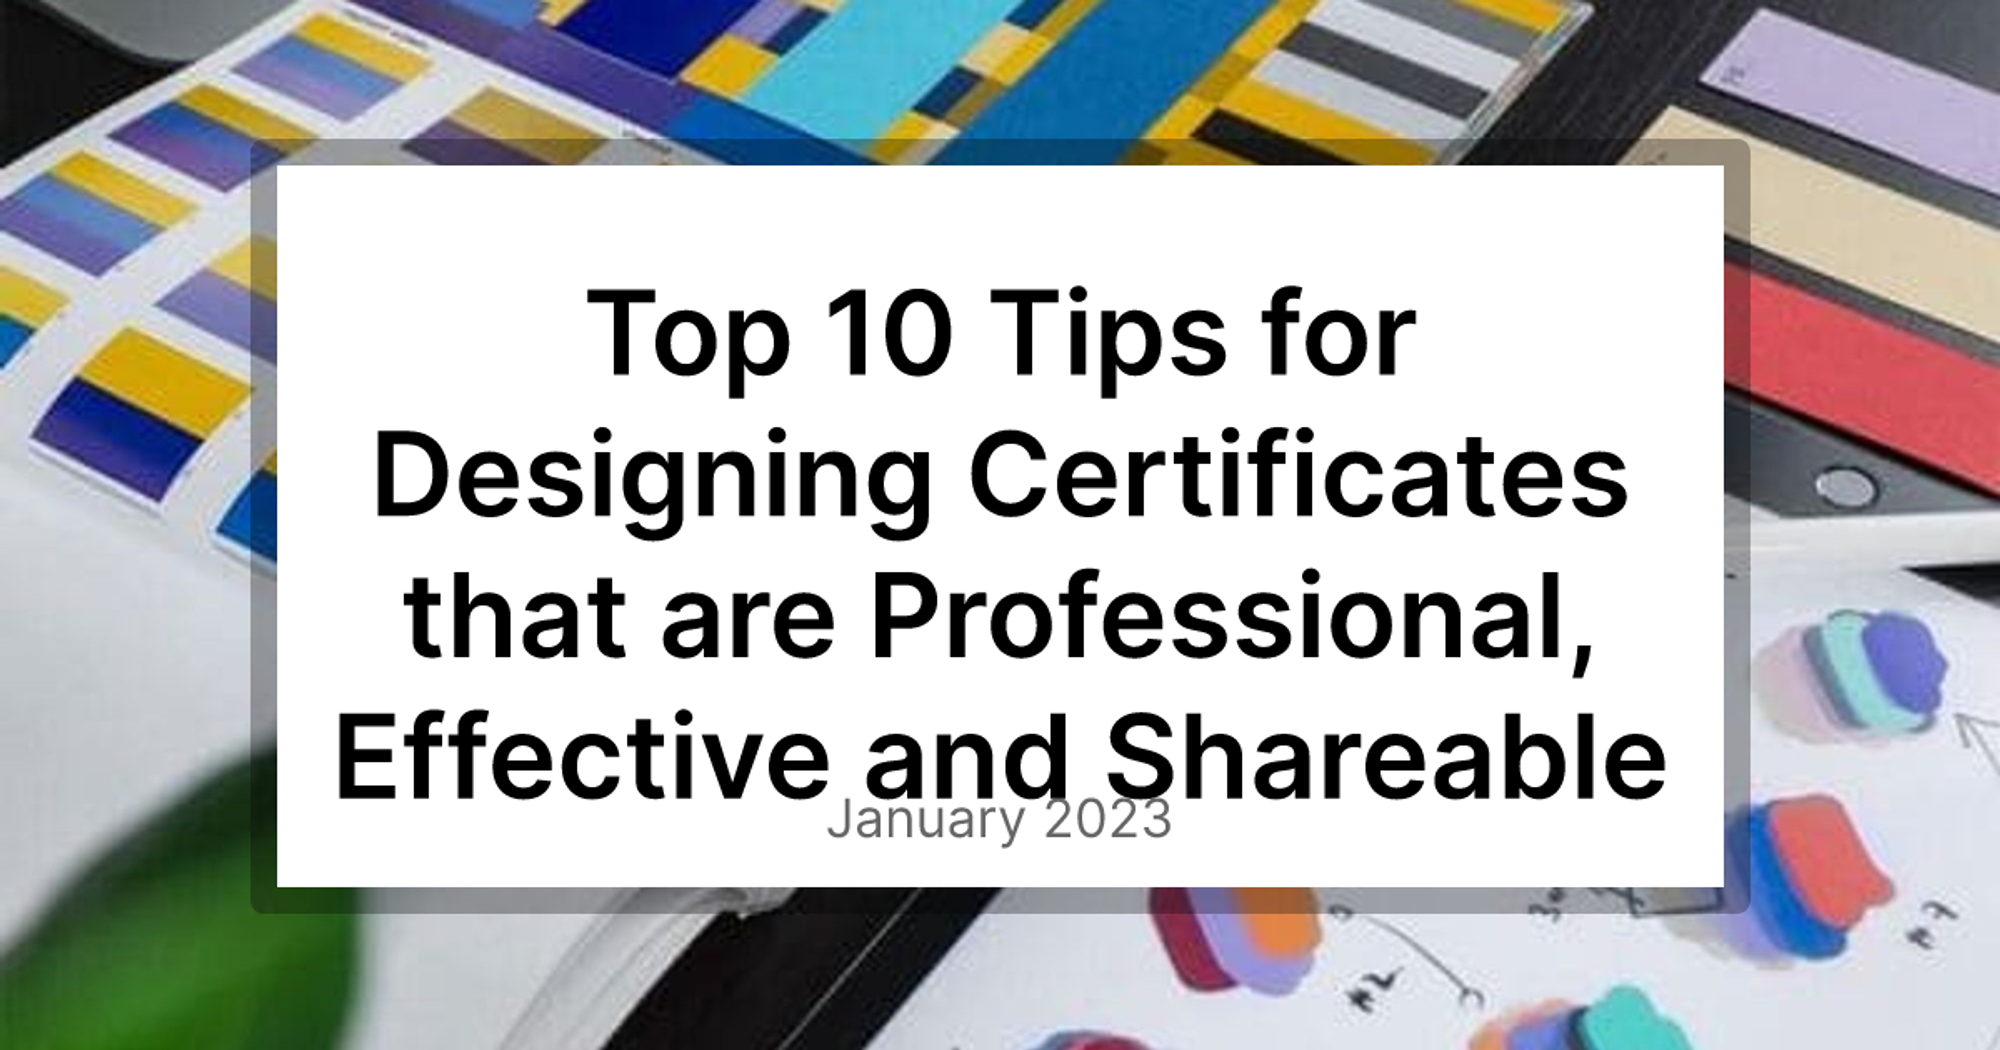 Top 10 Tips for Designing Certificates that are Professional, Effective and Shareable